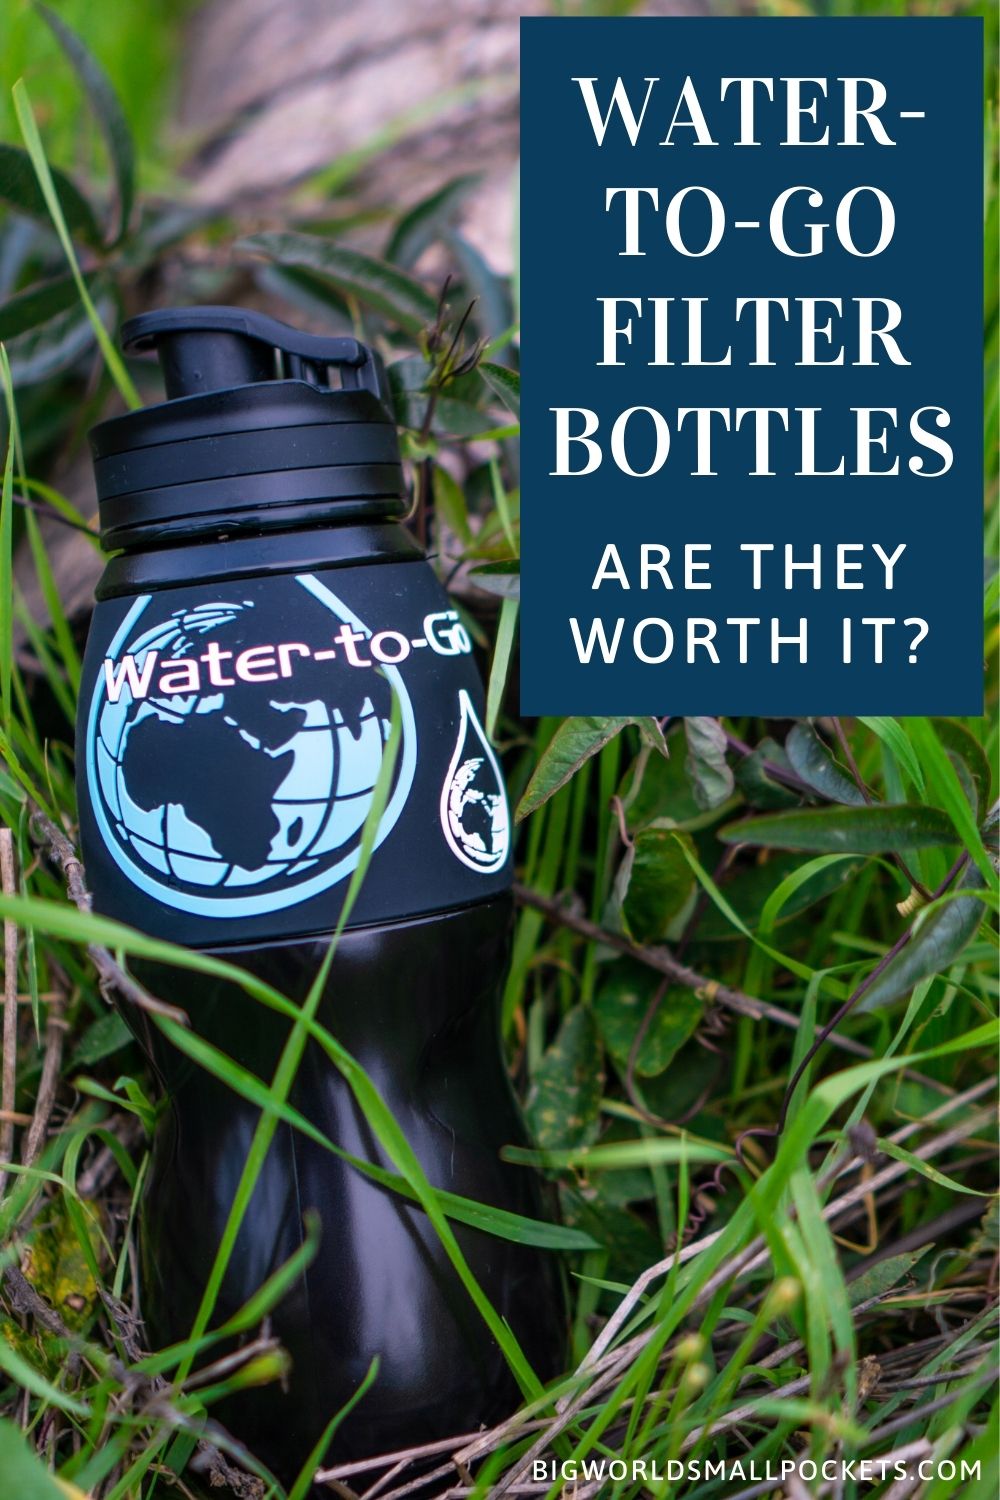 Water-To-Go Filter Bottles Are They Worth It